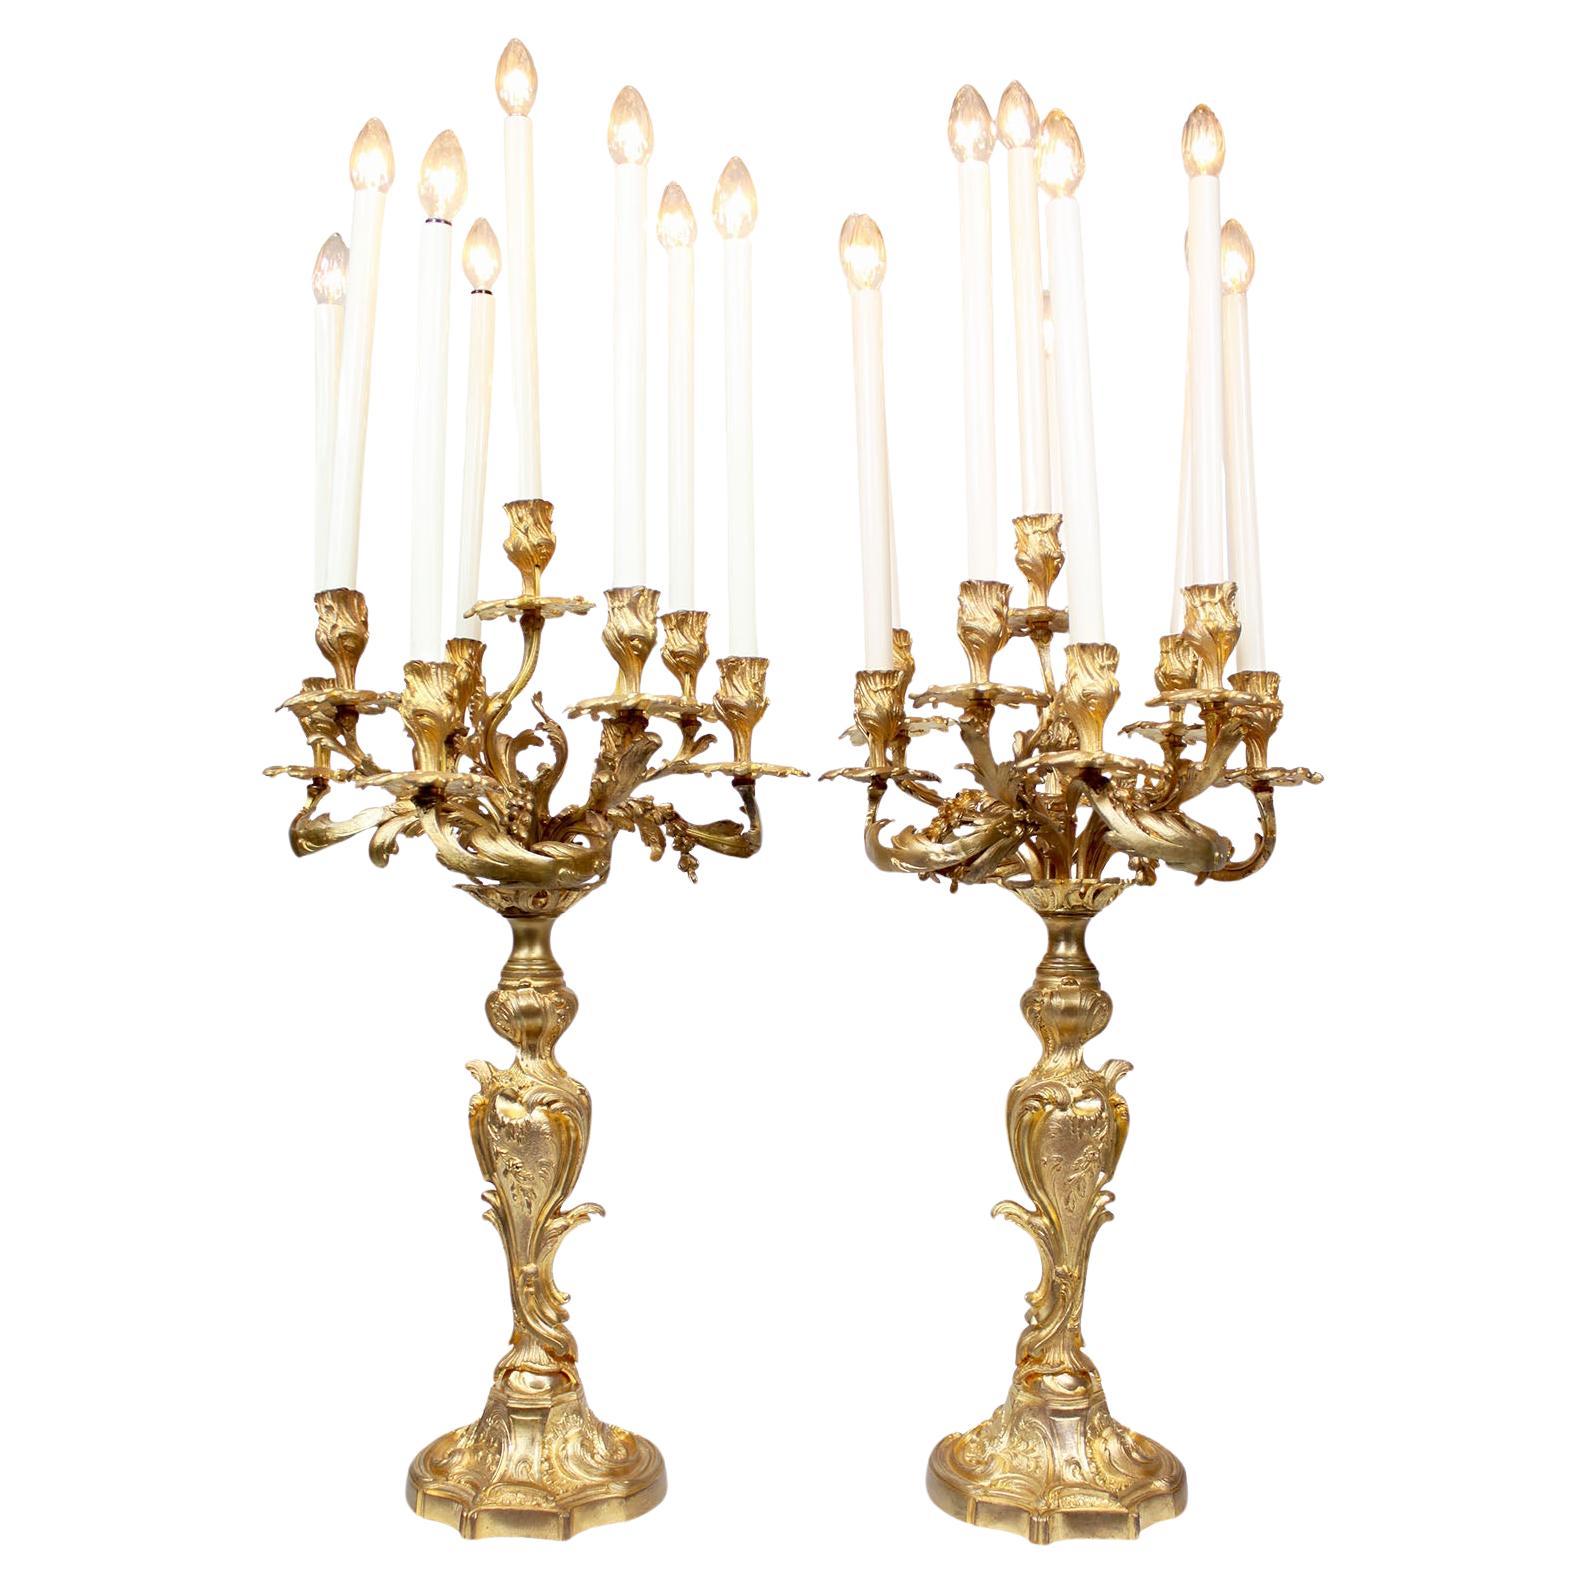 A Pair of French 19th Century Louis XV Style Gilt-Bronze Nine-Light Candelabra For Sale